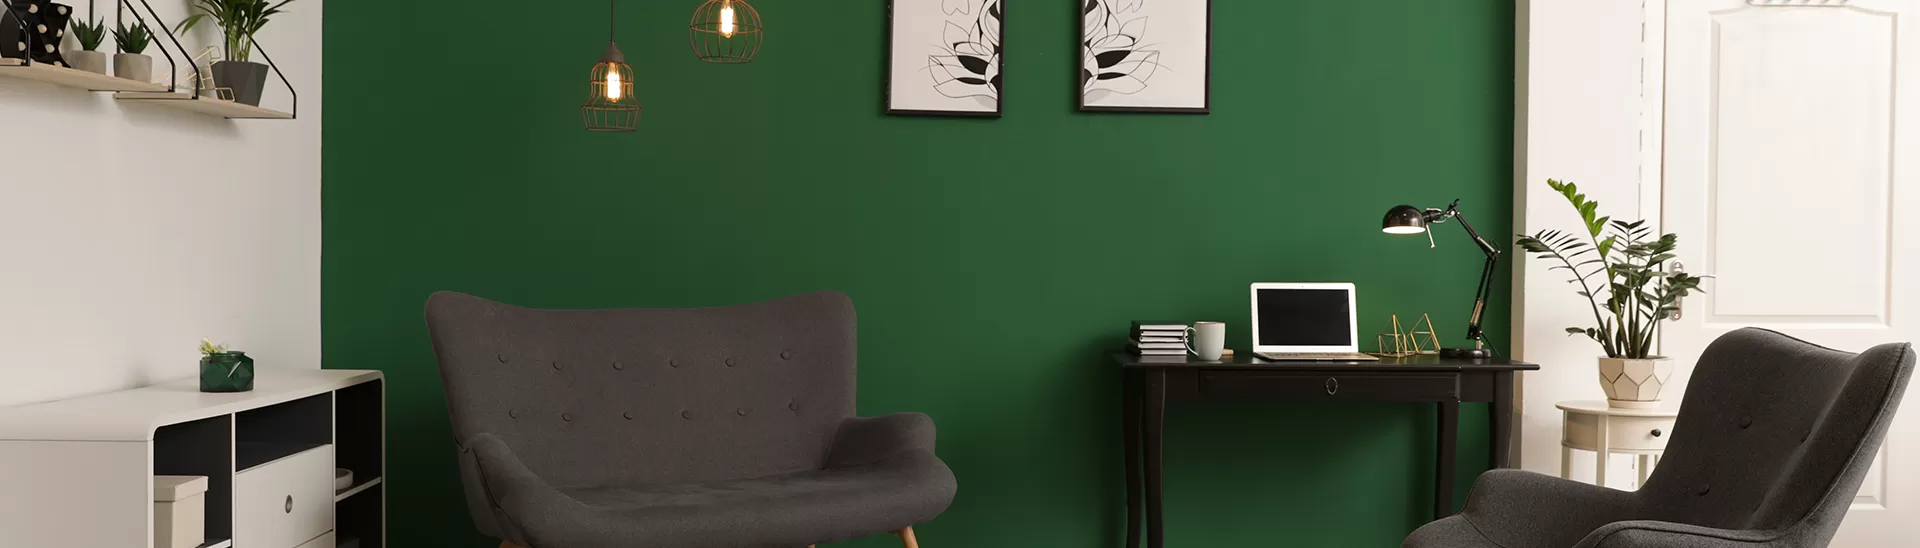 Top 10 Wall Paint Colour Ideas For Living Room